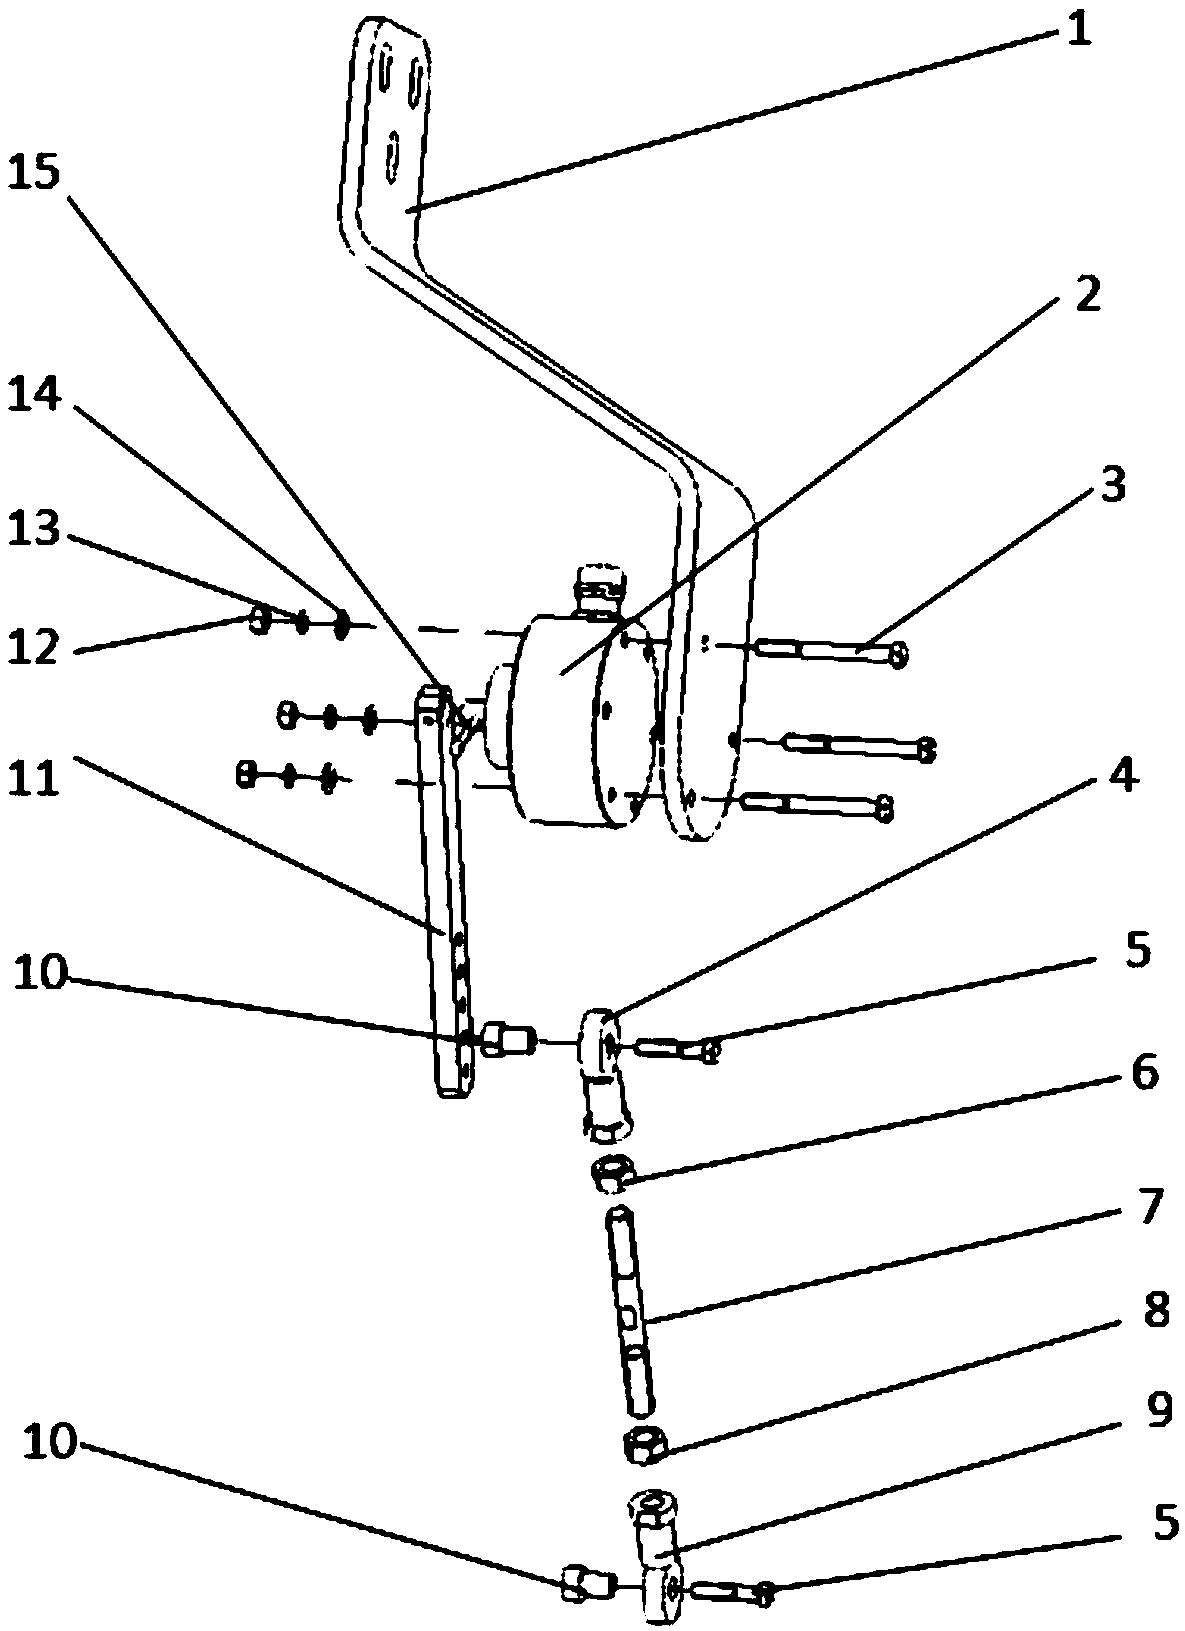 Mechanical equipment angle detection device